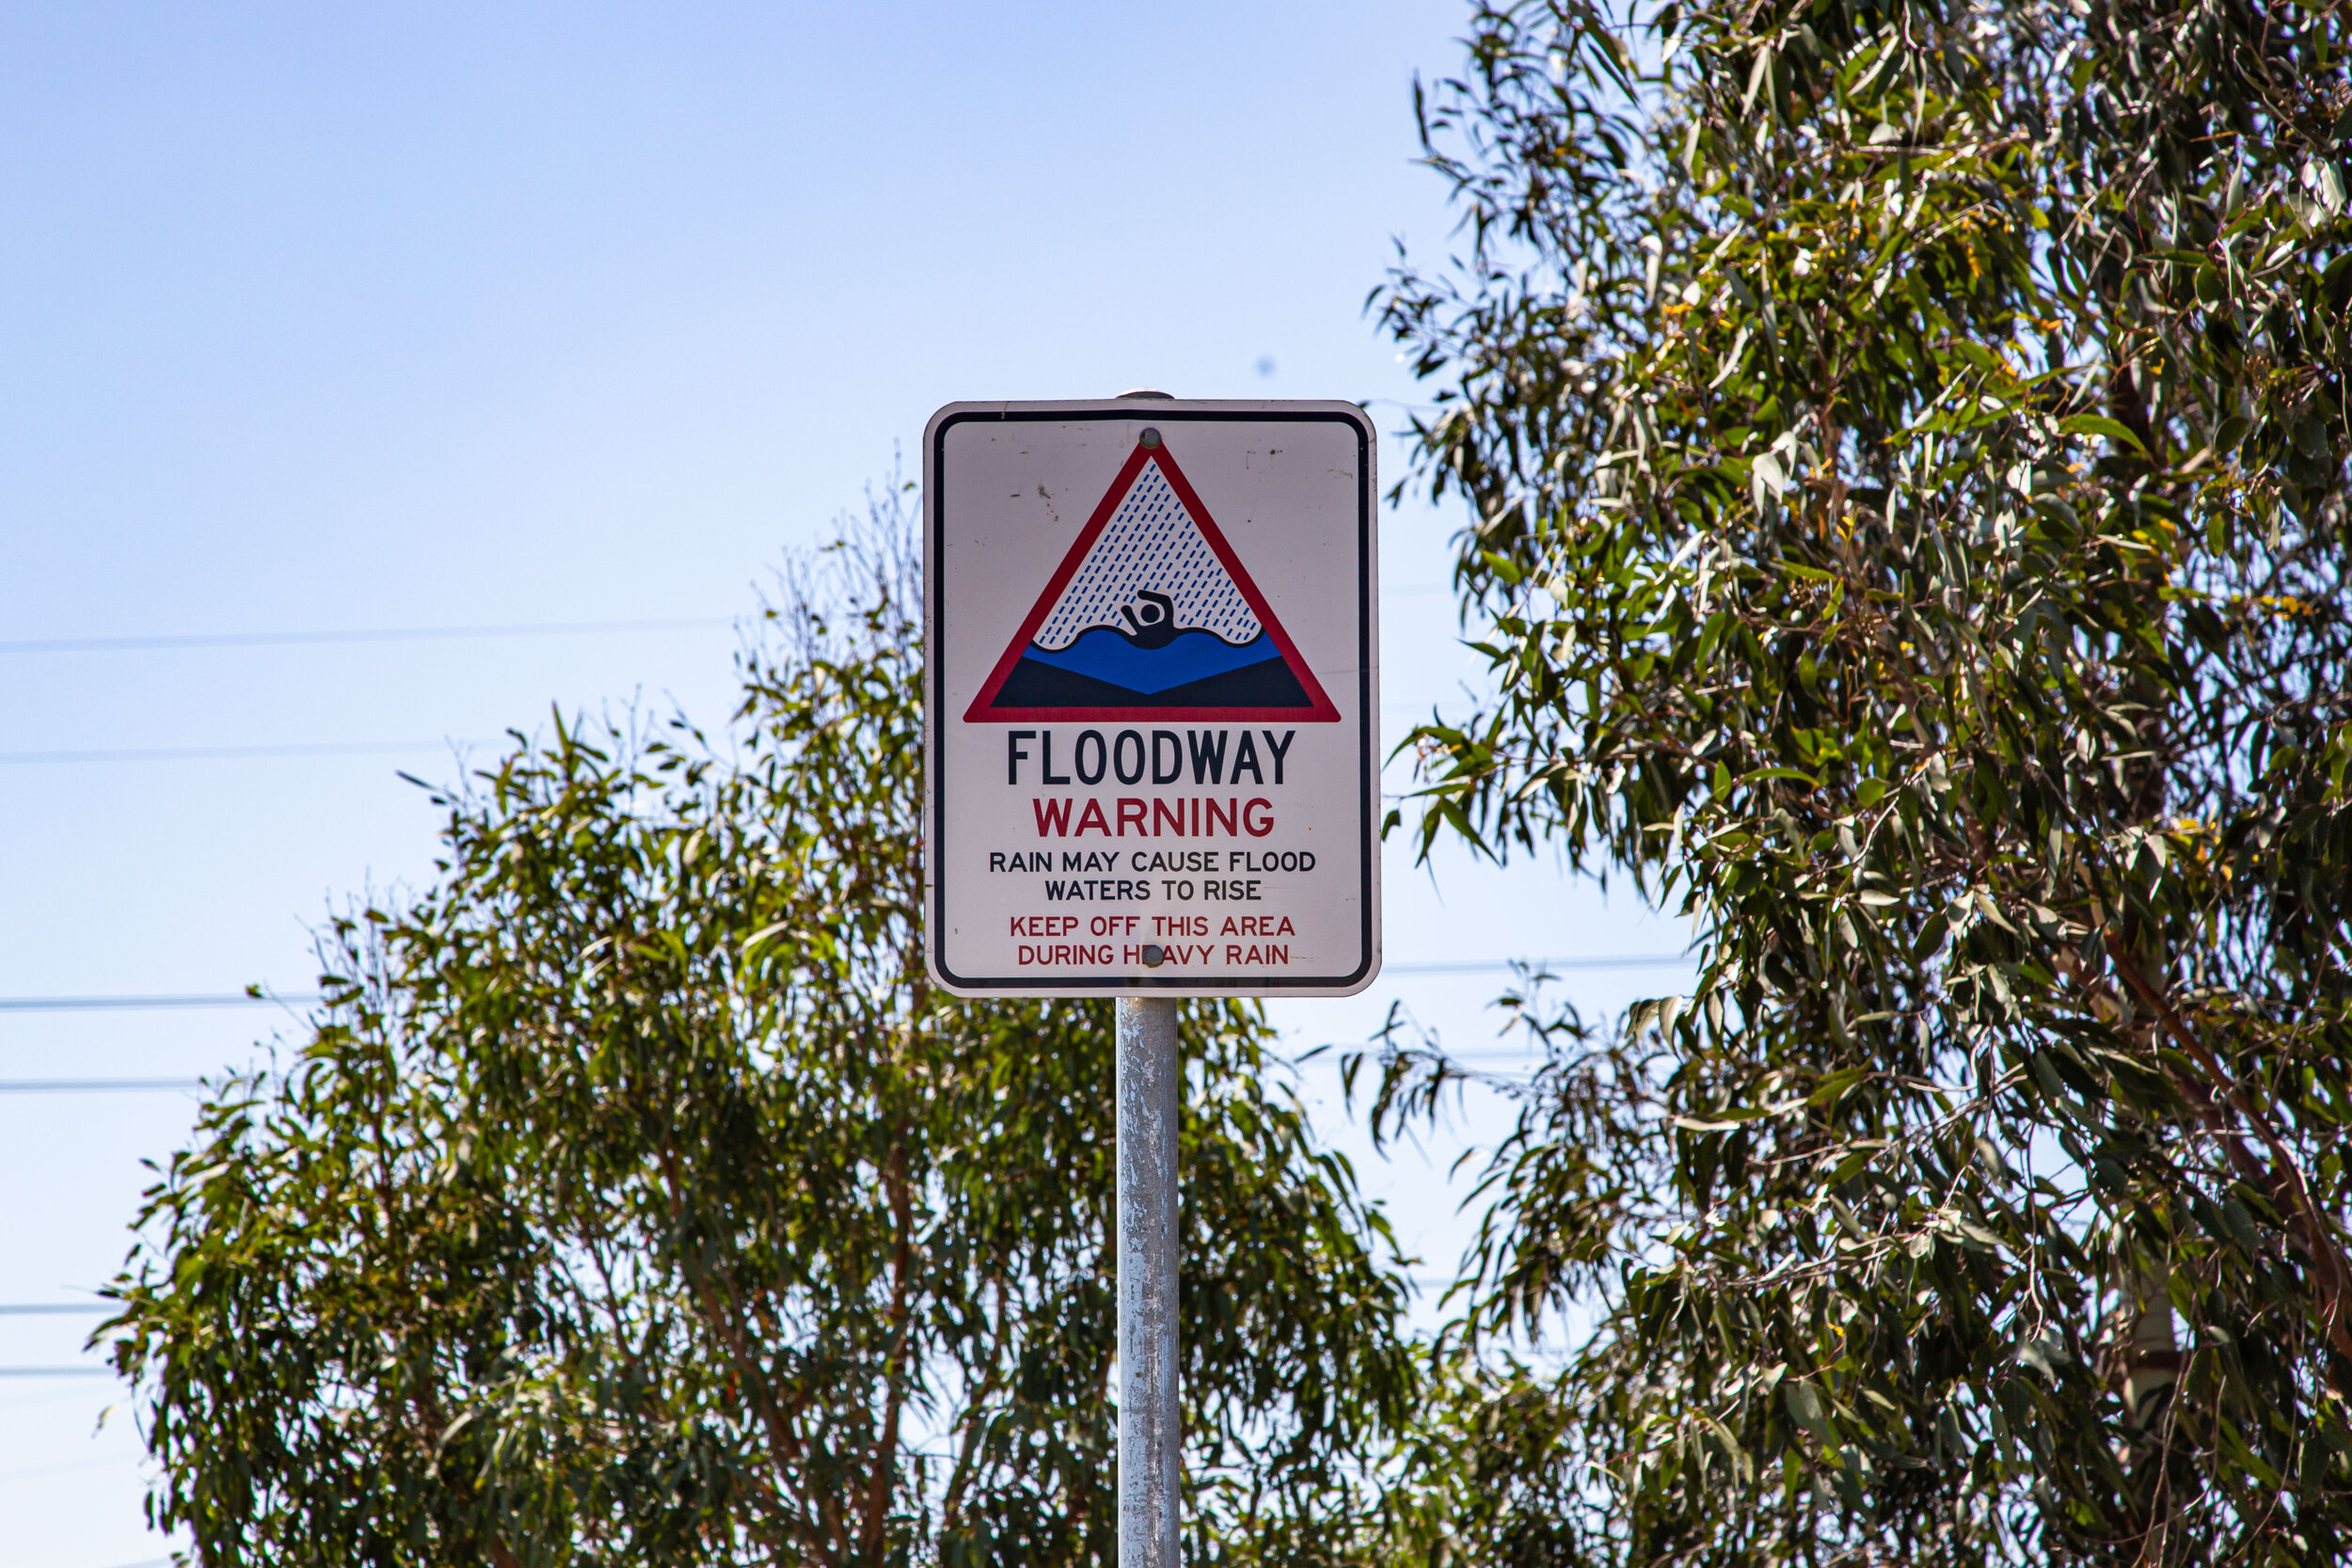 Flooding is usually out of sight and out of mind, like this sign.